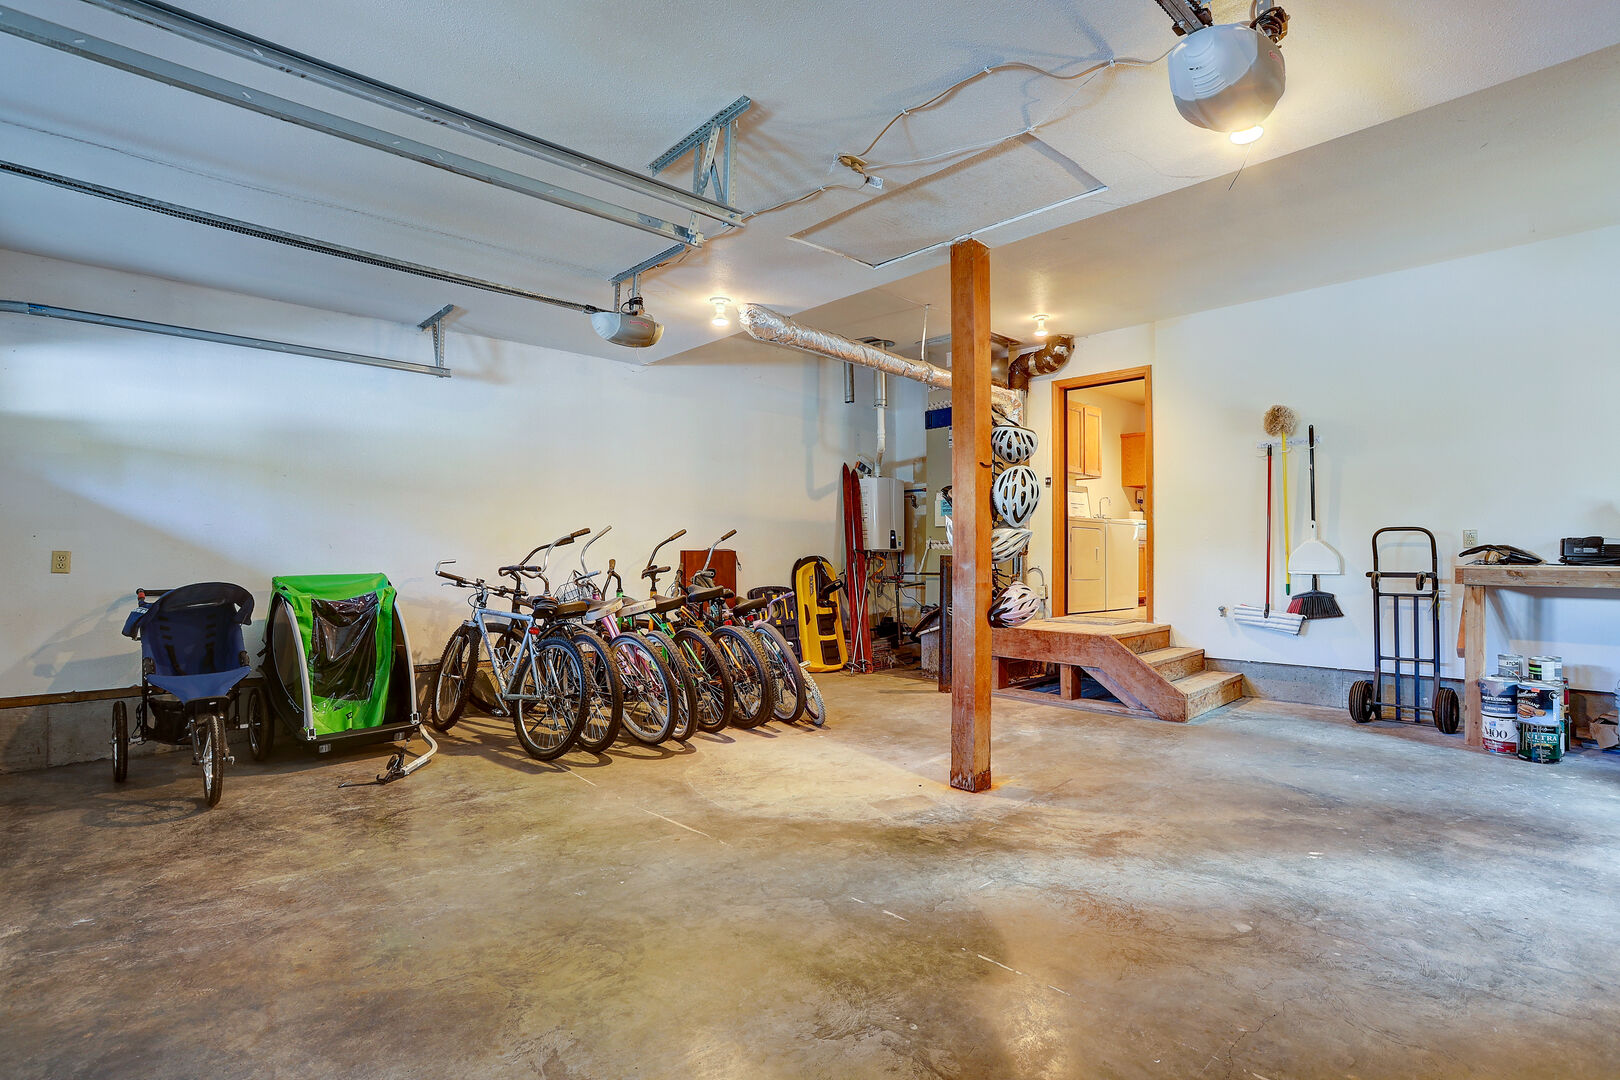 The house comes with nine bicycles, a bike trailer for toddlers, jogging stroller and an assortment of bike helmets.